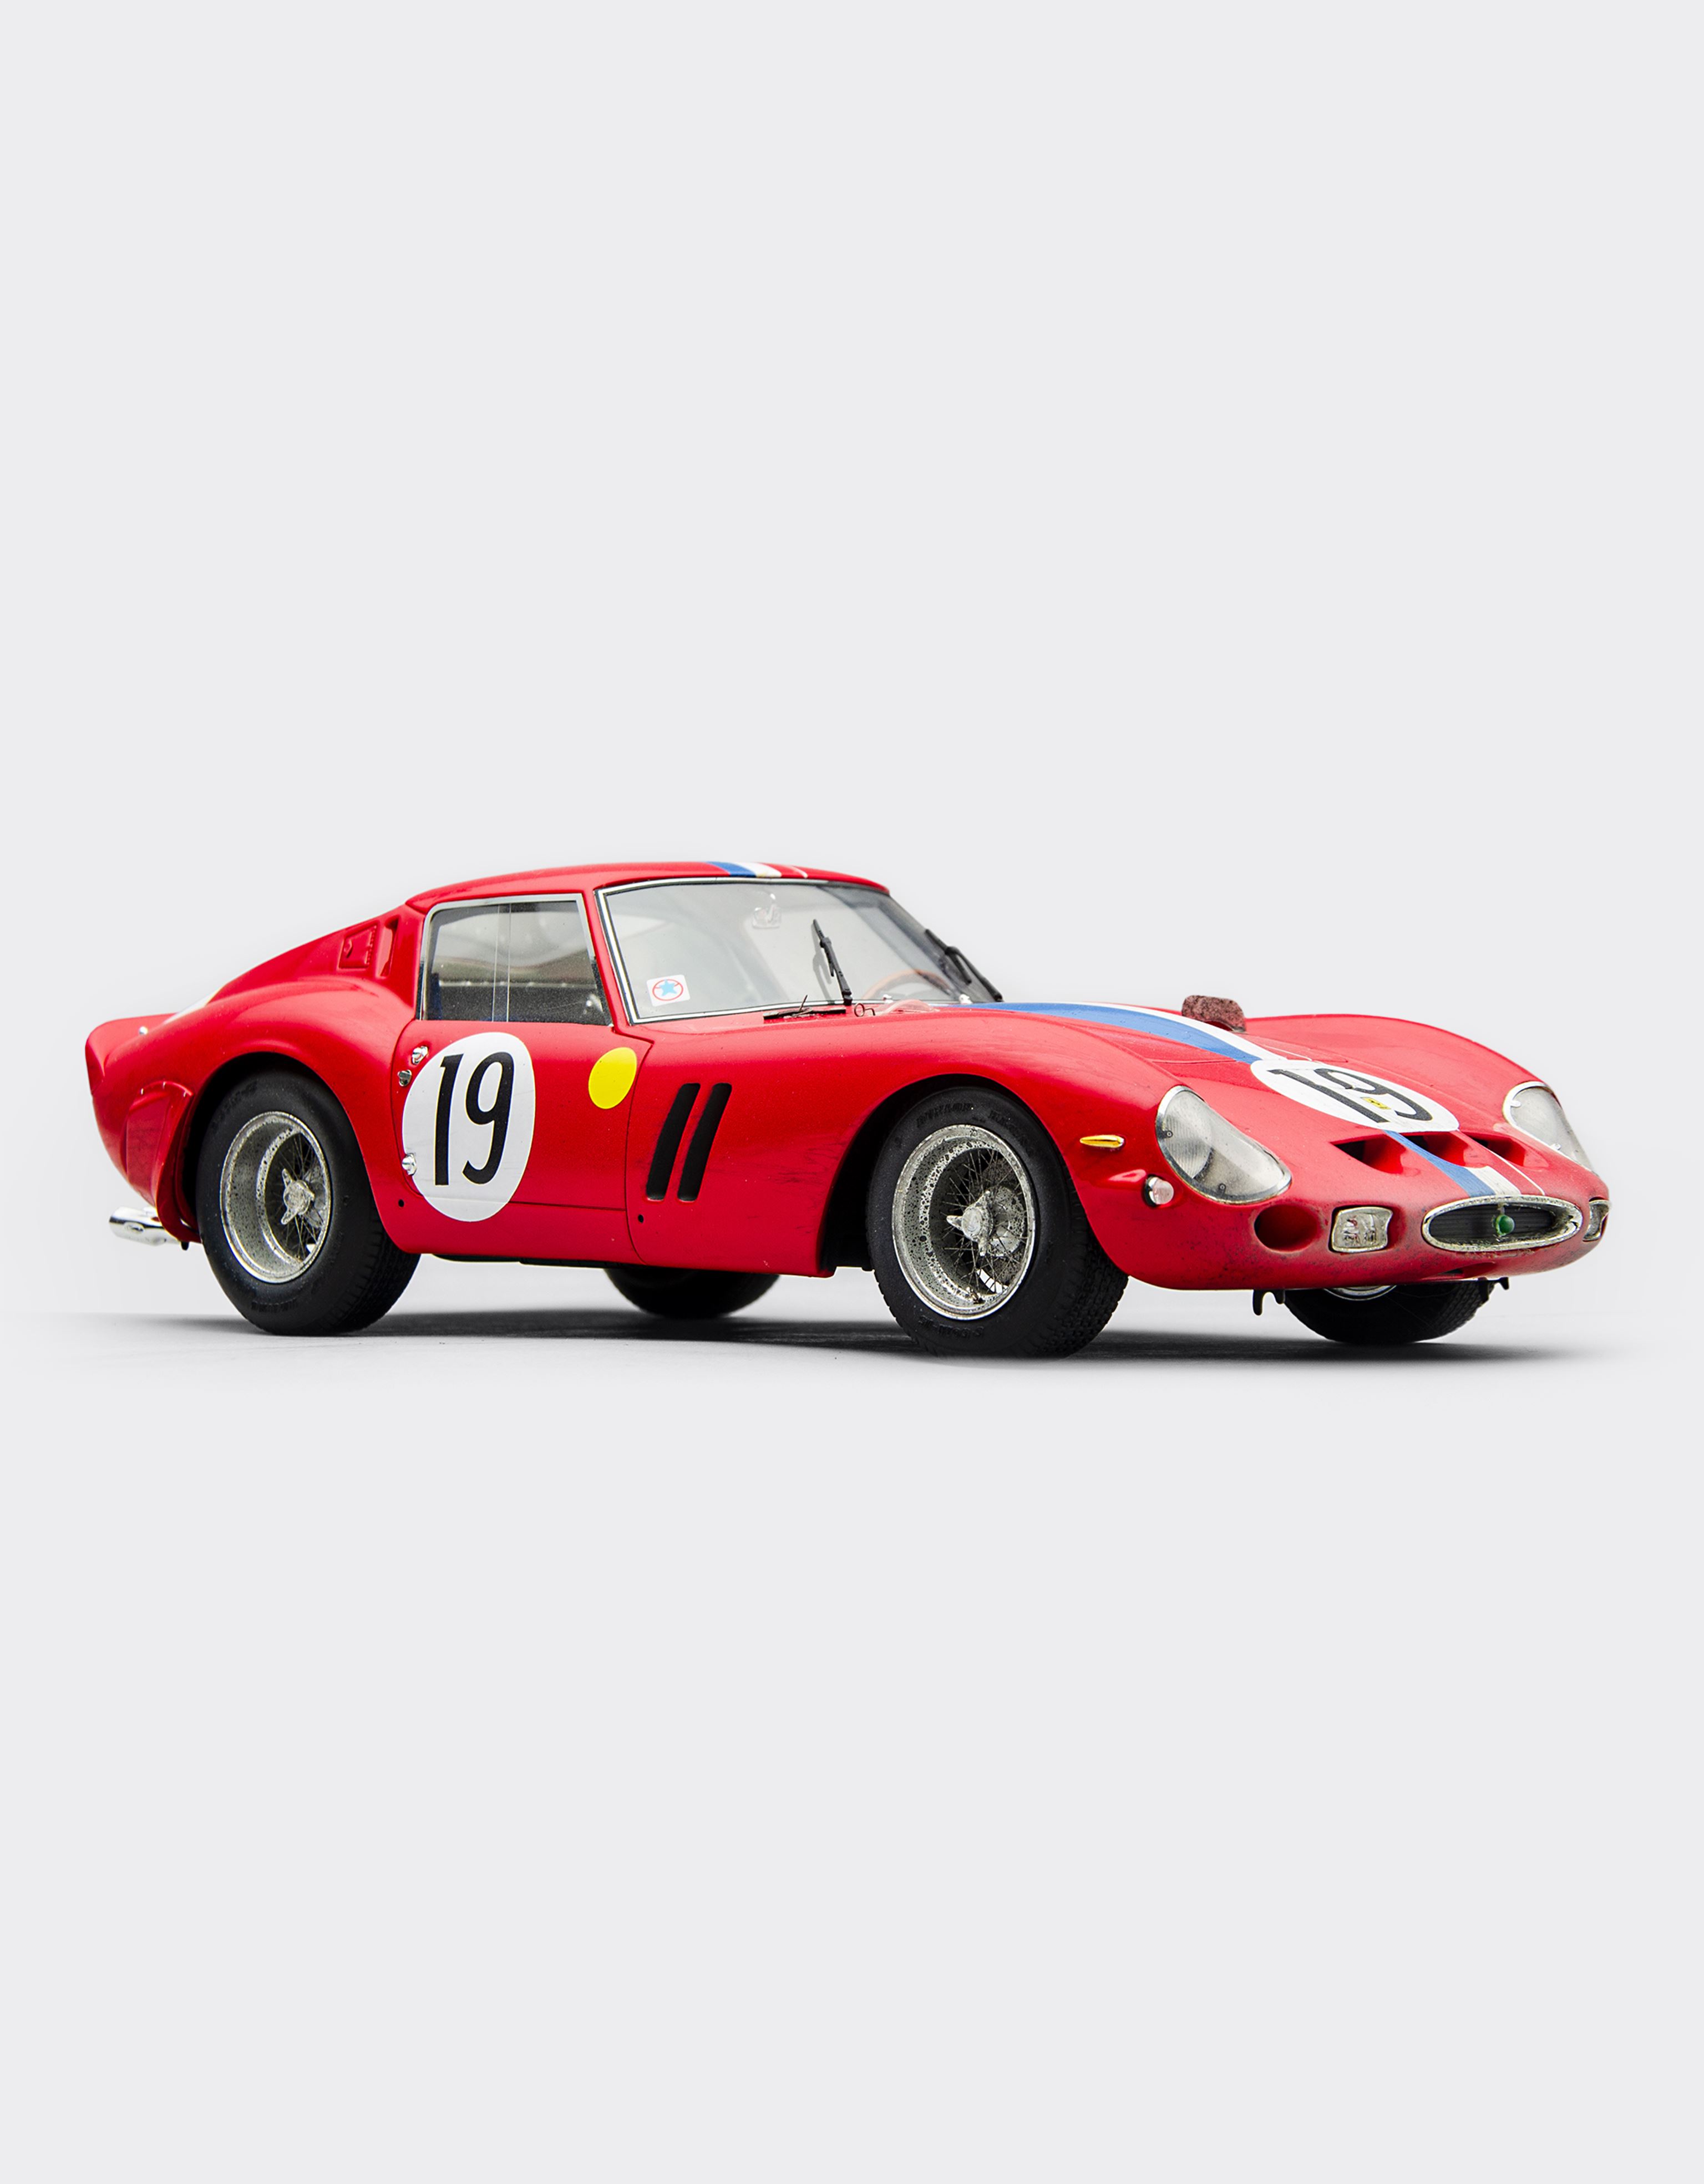 Ferrari 250 GTO 1962 “Race weathered” Le Mans in 1:18 scale in 